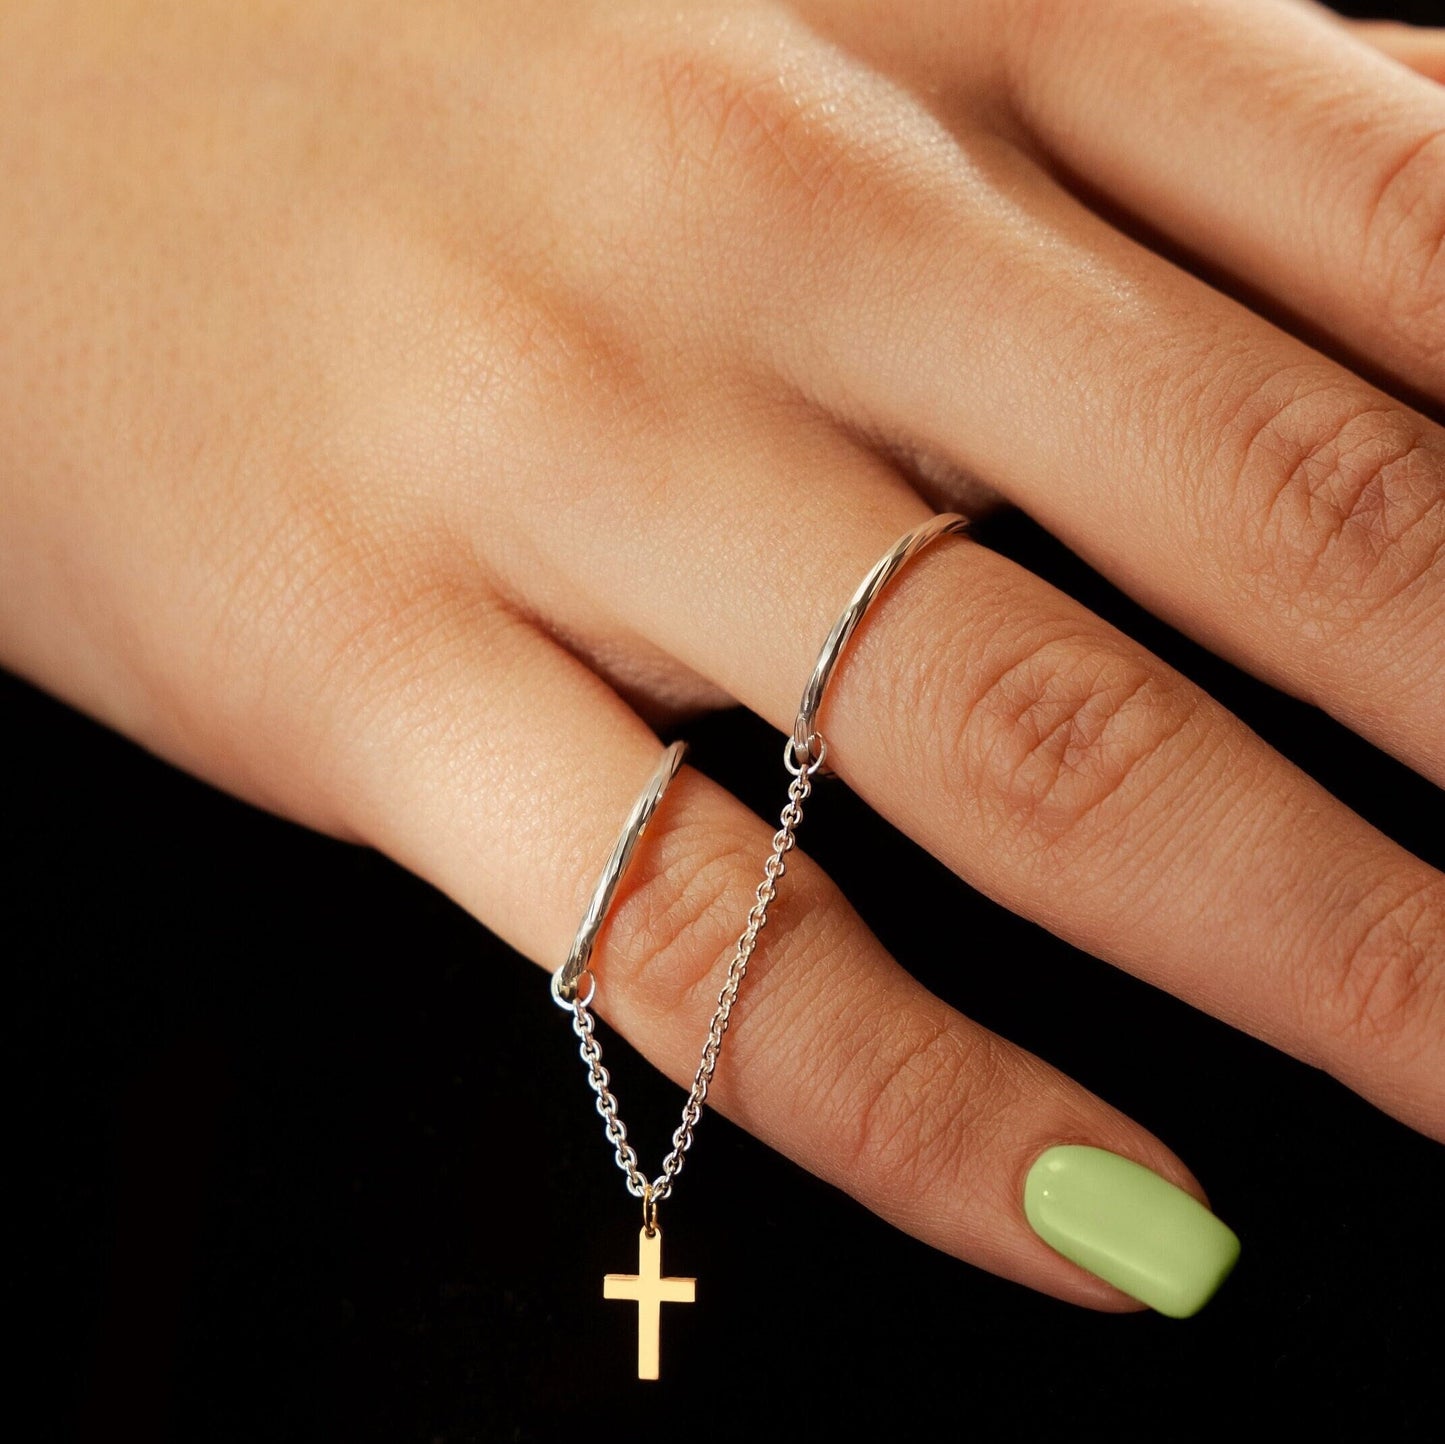 Double Finger Chain Ring with Gold Cross Pendant